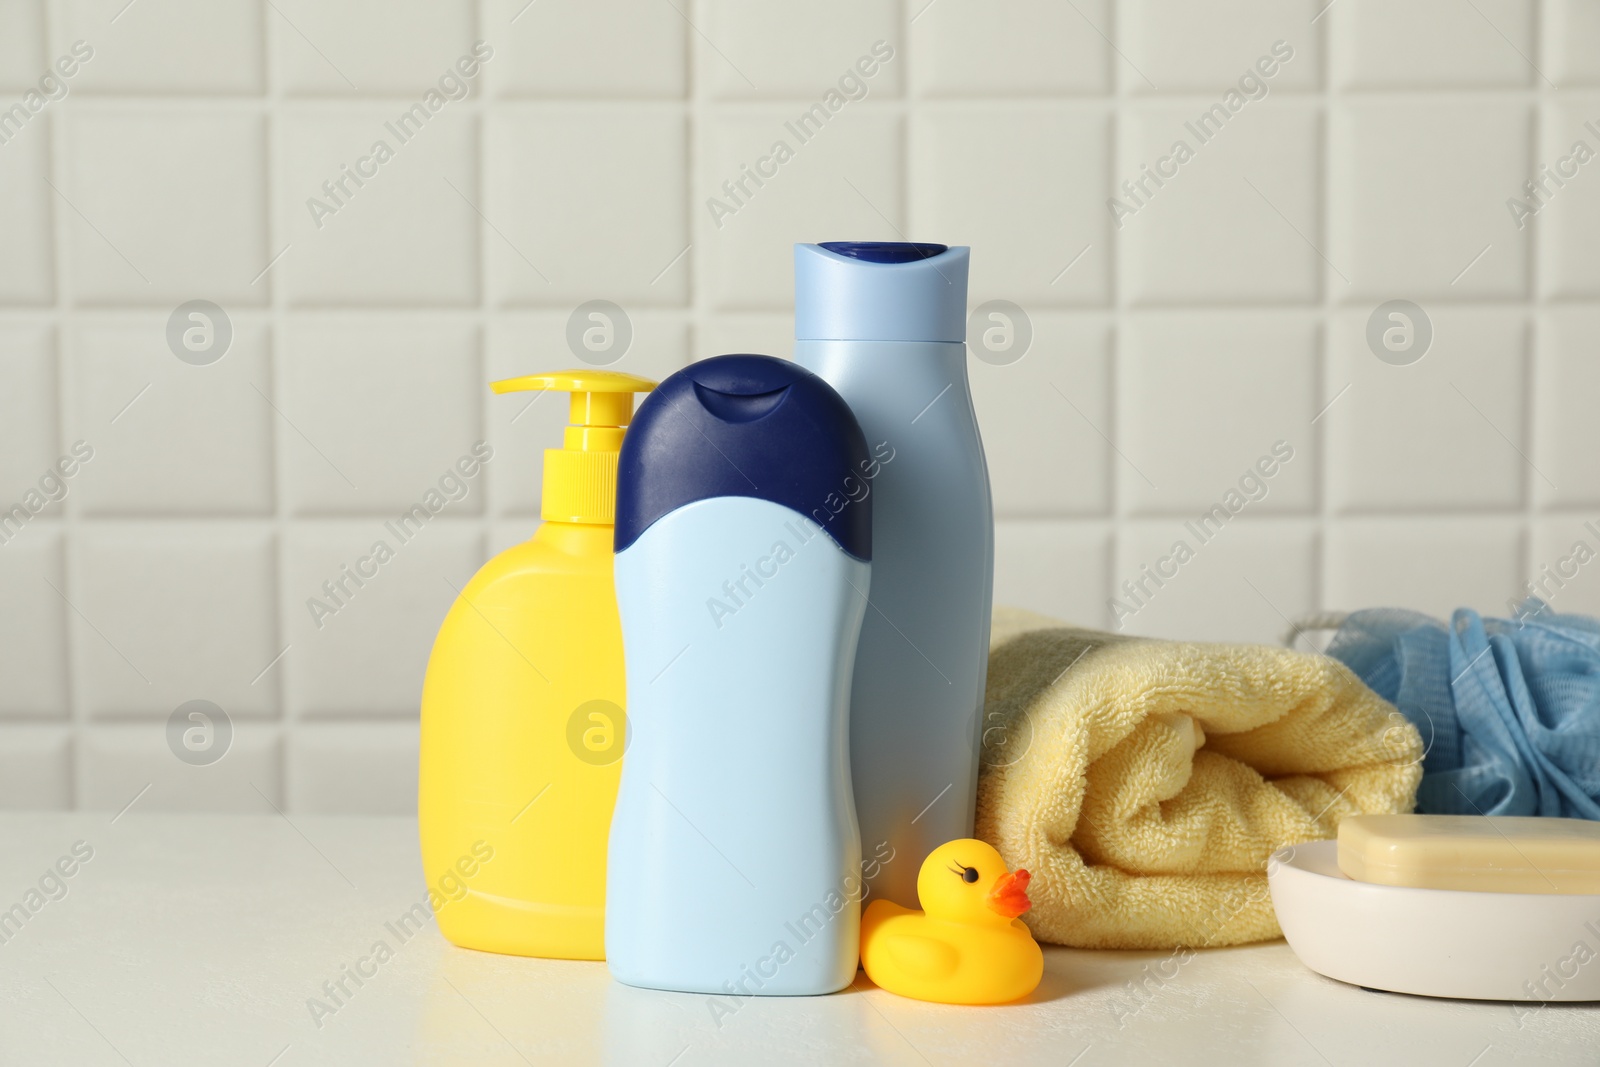 Photo of Baby cosmetic products, bath duck, sponge and towel on white table against tiled wall